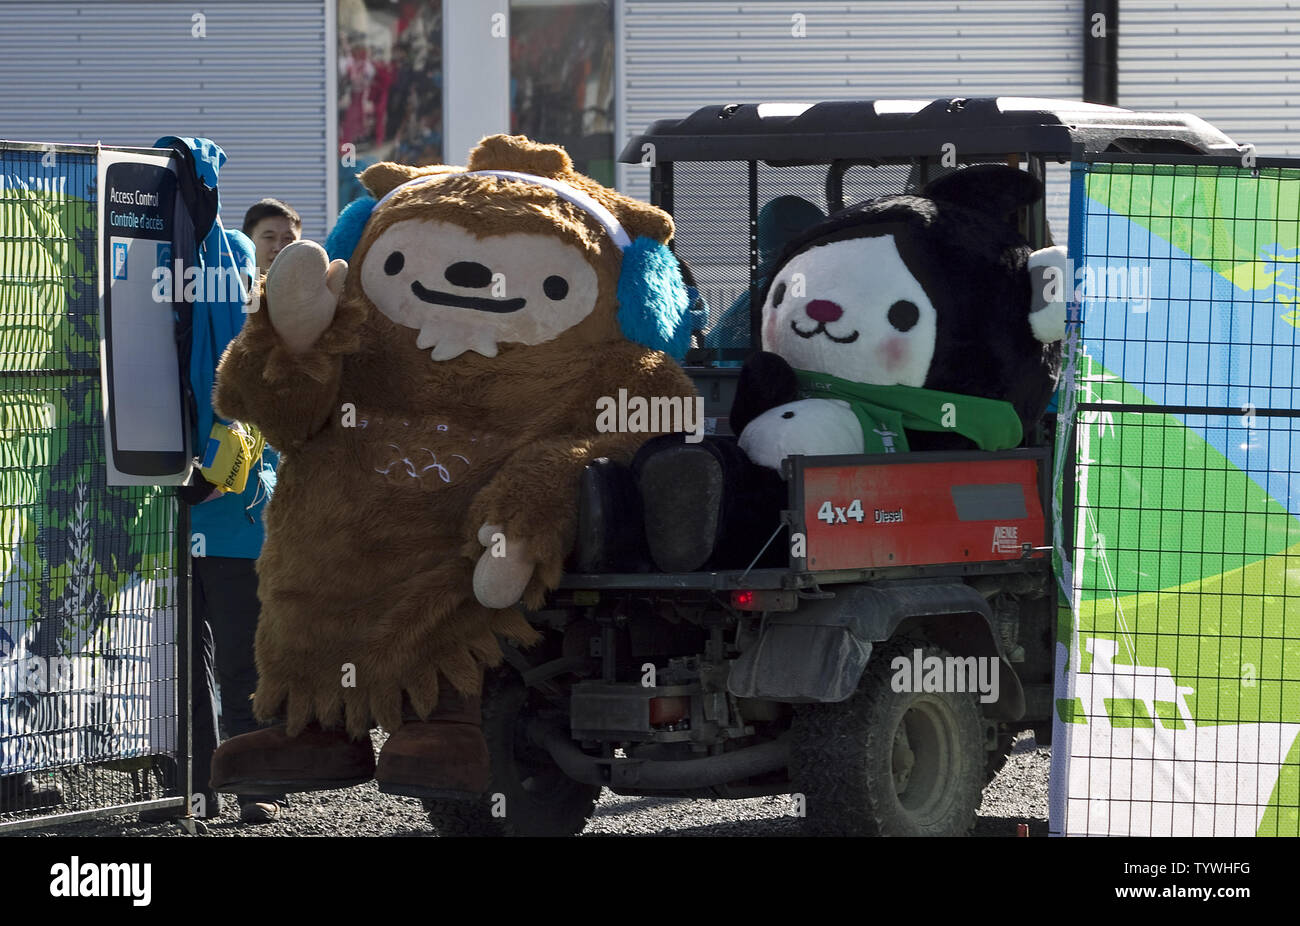 Olympic mascots Quatchi (L.) and Miga hitch a ride on the back of a golf cart as they make the rounds in Biathlon Men's 15 km Mass Start during Vancouver 2010 Winter Olympics at the Whistler Olympic Park in Whistler, British Columbia, February 21, 2010. UPI /Heinz Ruckemann Stock Photo